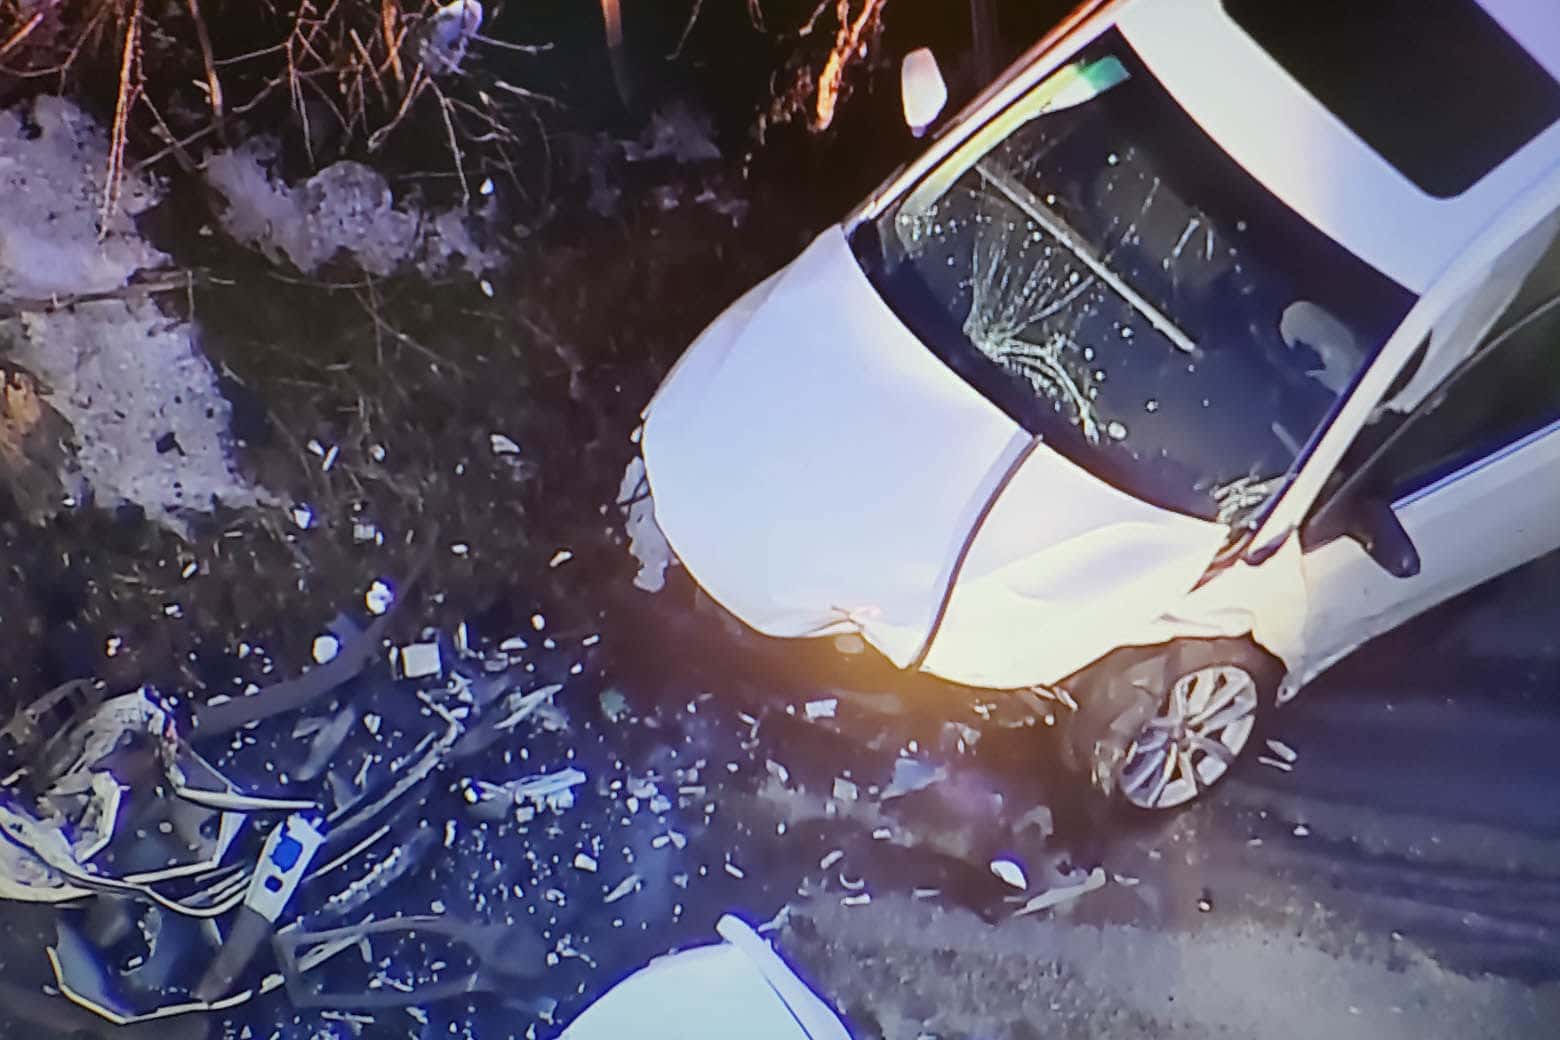 The two-vehicle crash happened just before 8 a.m. in the 28000 block of Ridge Road at Kemptown Road in Damascus, Maryland. (Courtesy NBC Washington)